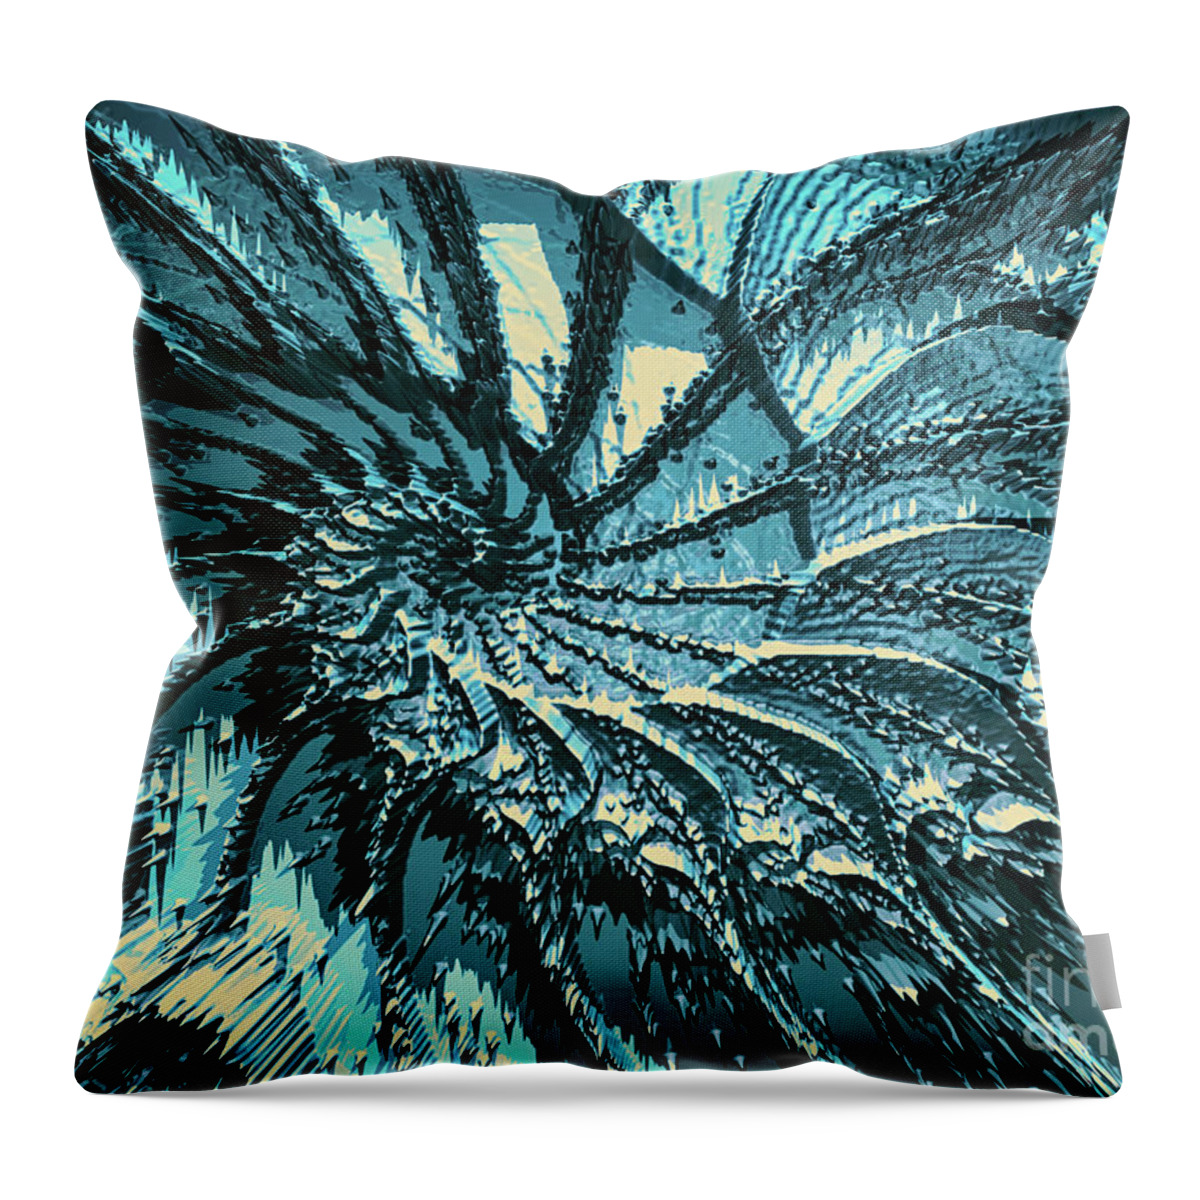 Turquoise Throw Pillow featuring the digital art Spinning Turquoise Fractal by Phil Perkins